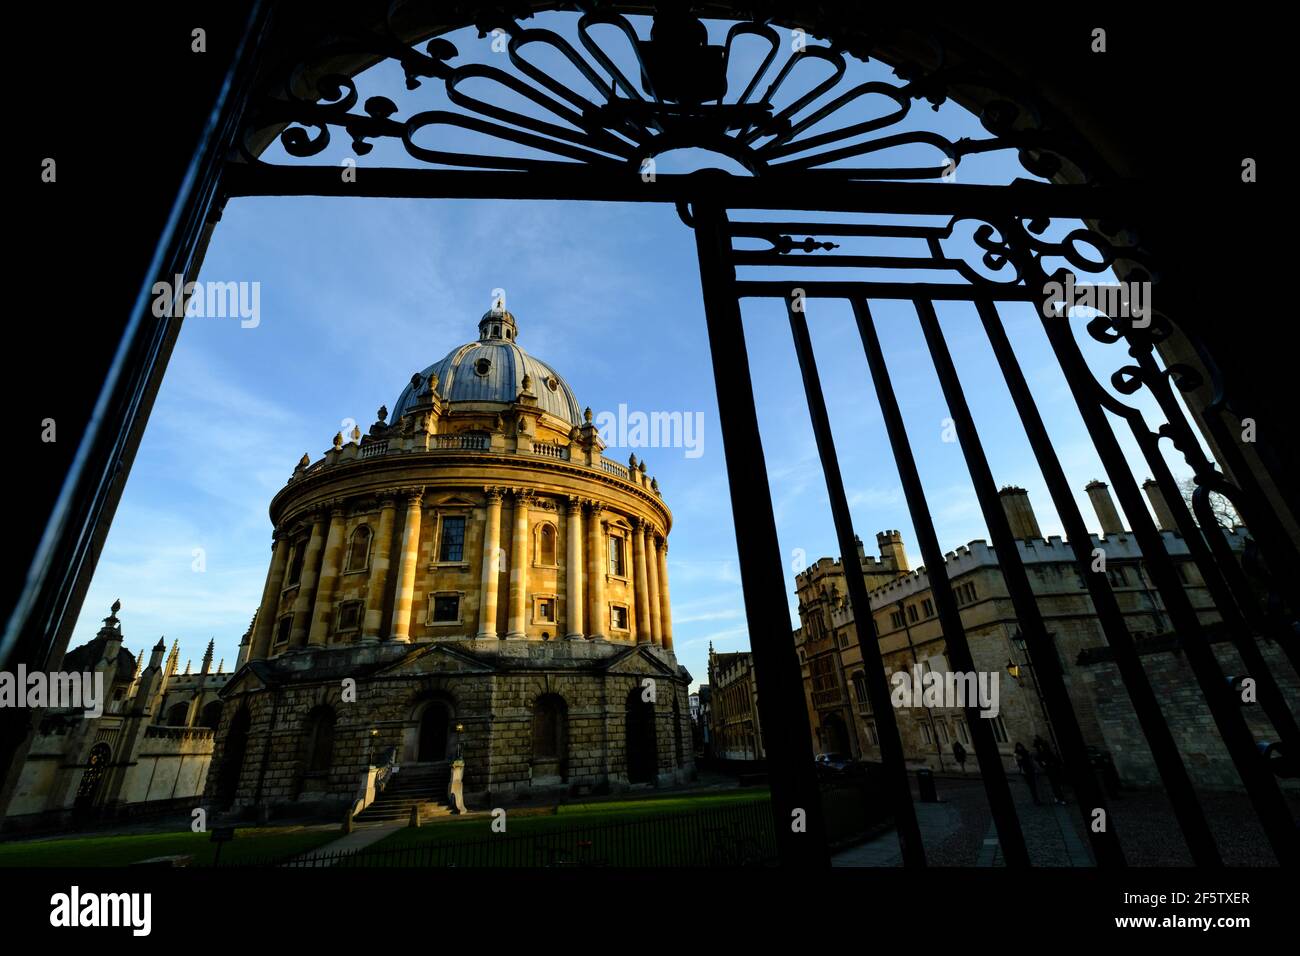 The Radcliffe Camera seen from the gates of the Bodleian Library, Oxford, UK Stock Photo